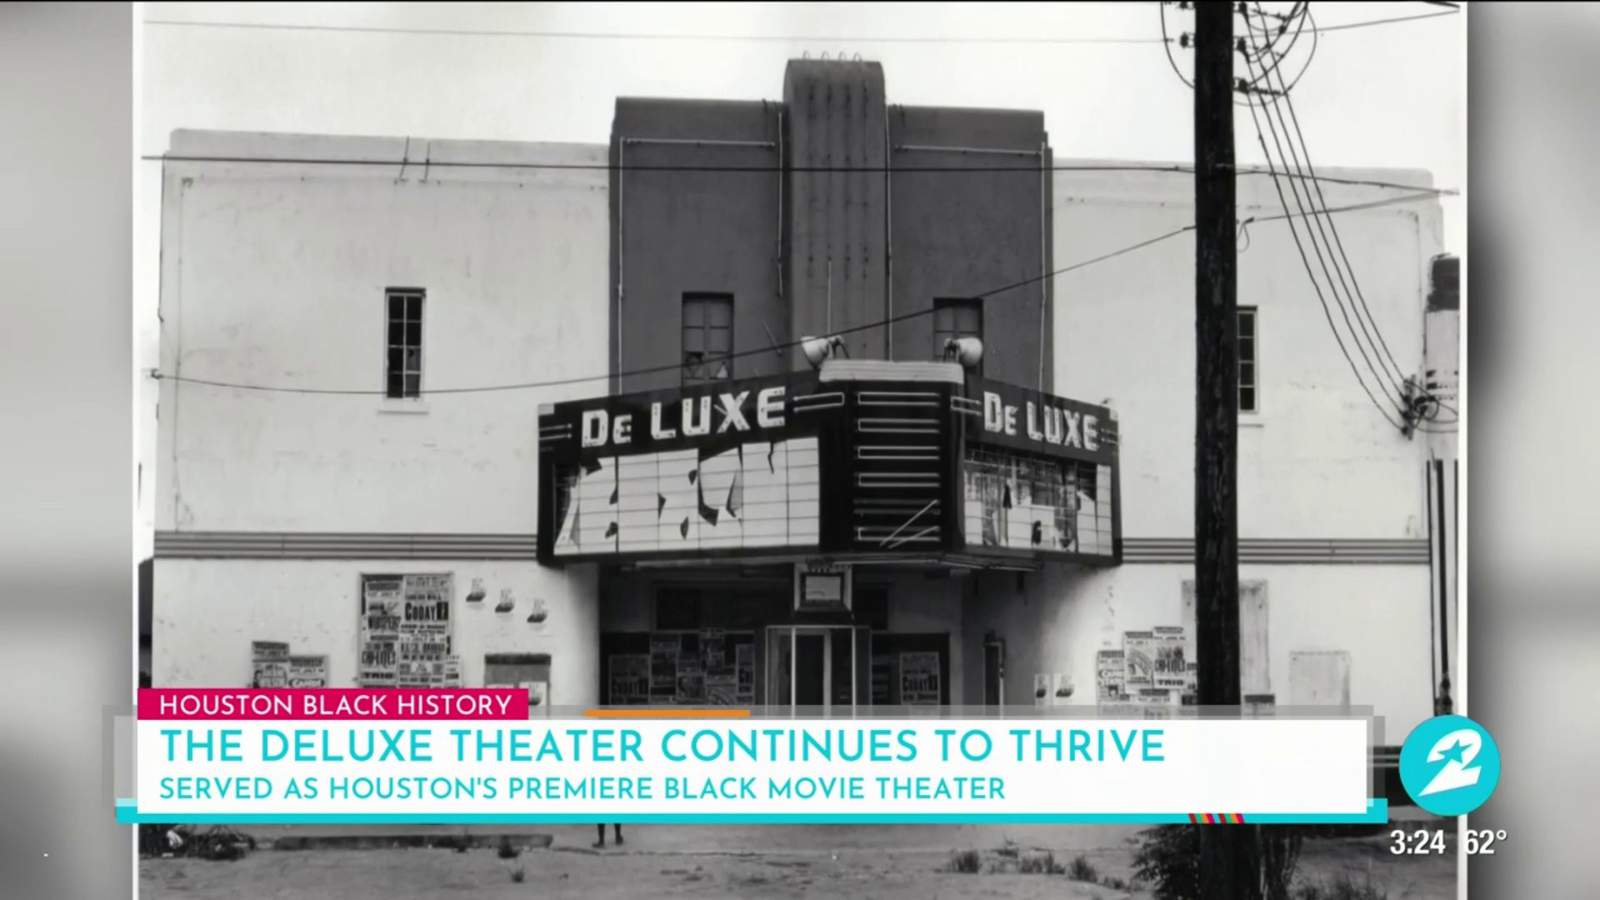 The Deluxe Theater continuing to preserve Houston’s black history